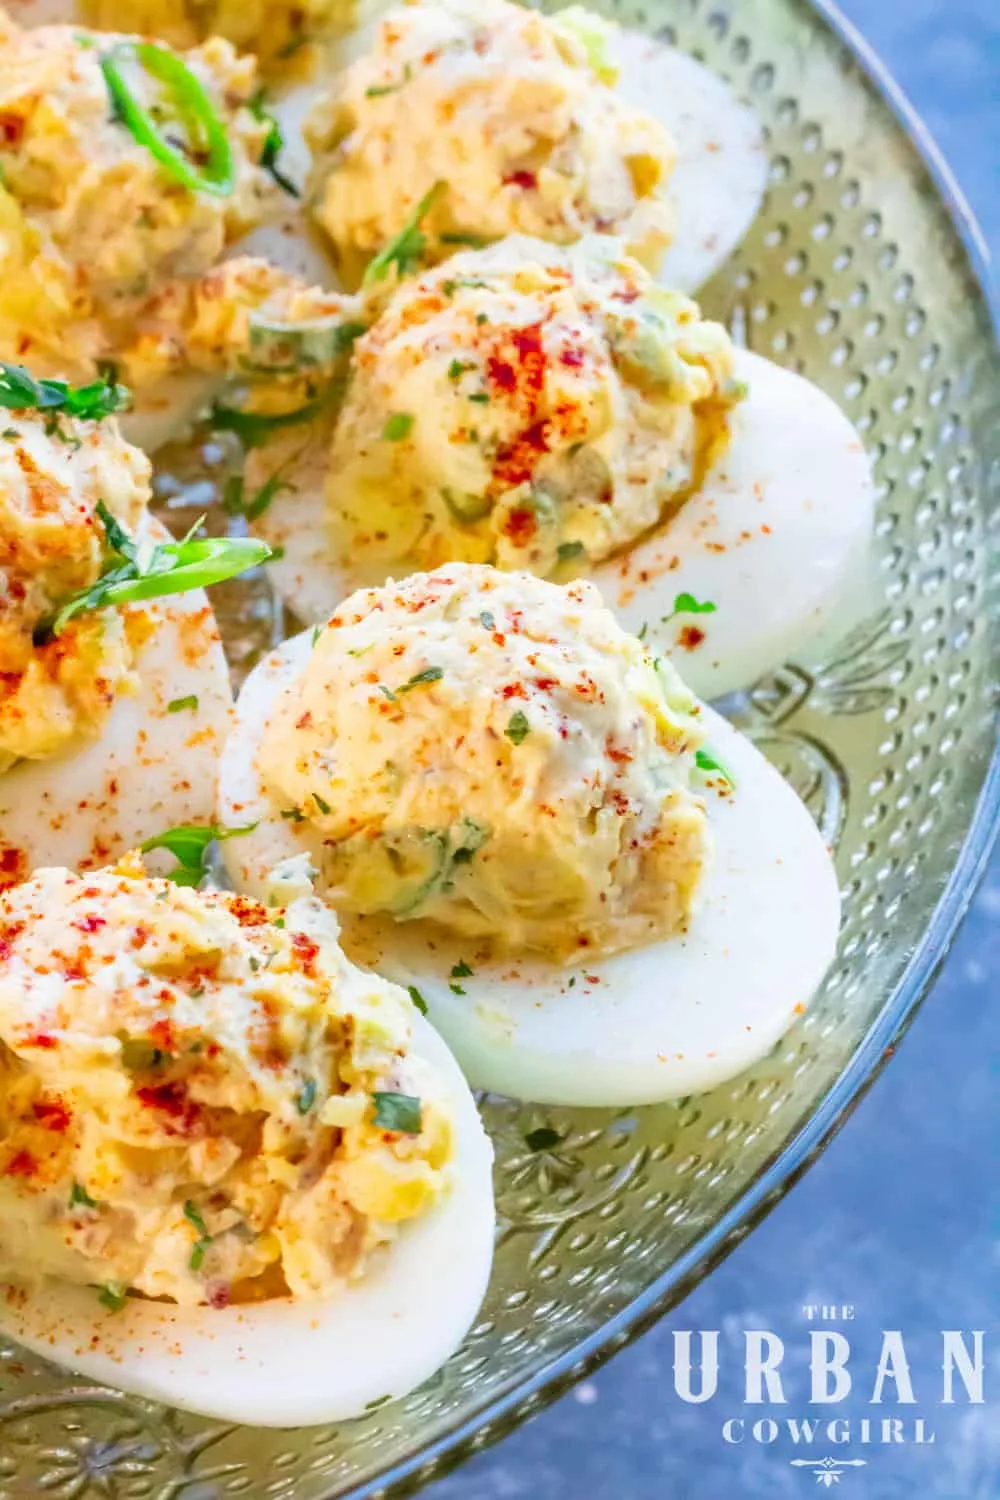 A long, large platter of cajun deviled eggs sprinkled with herbs.